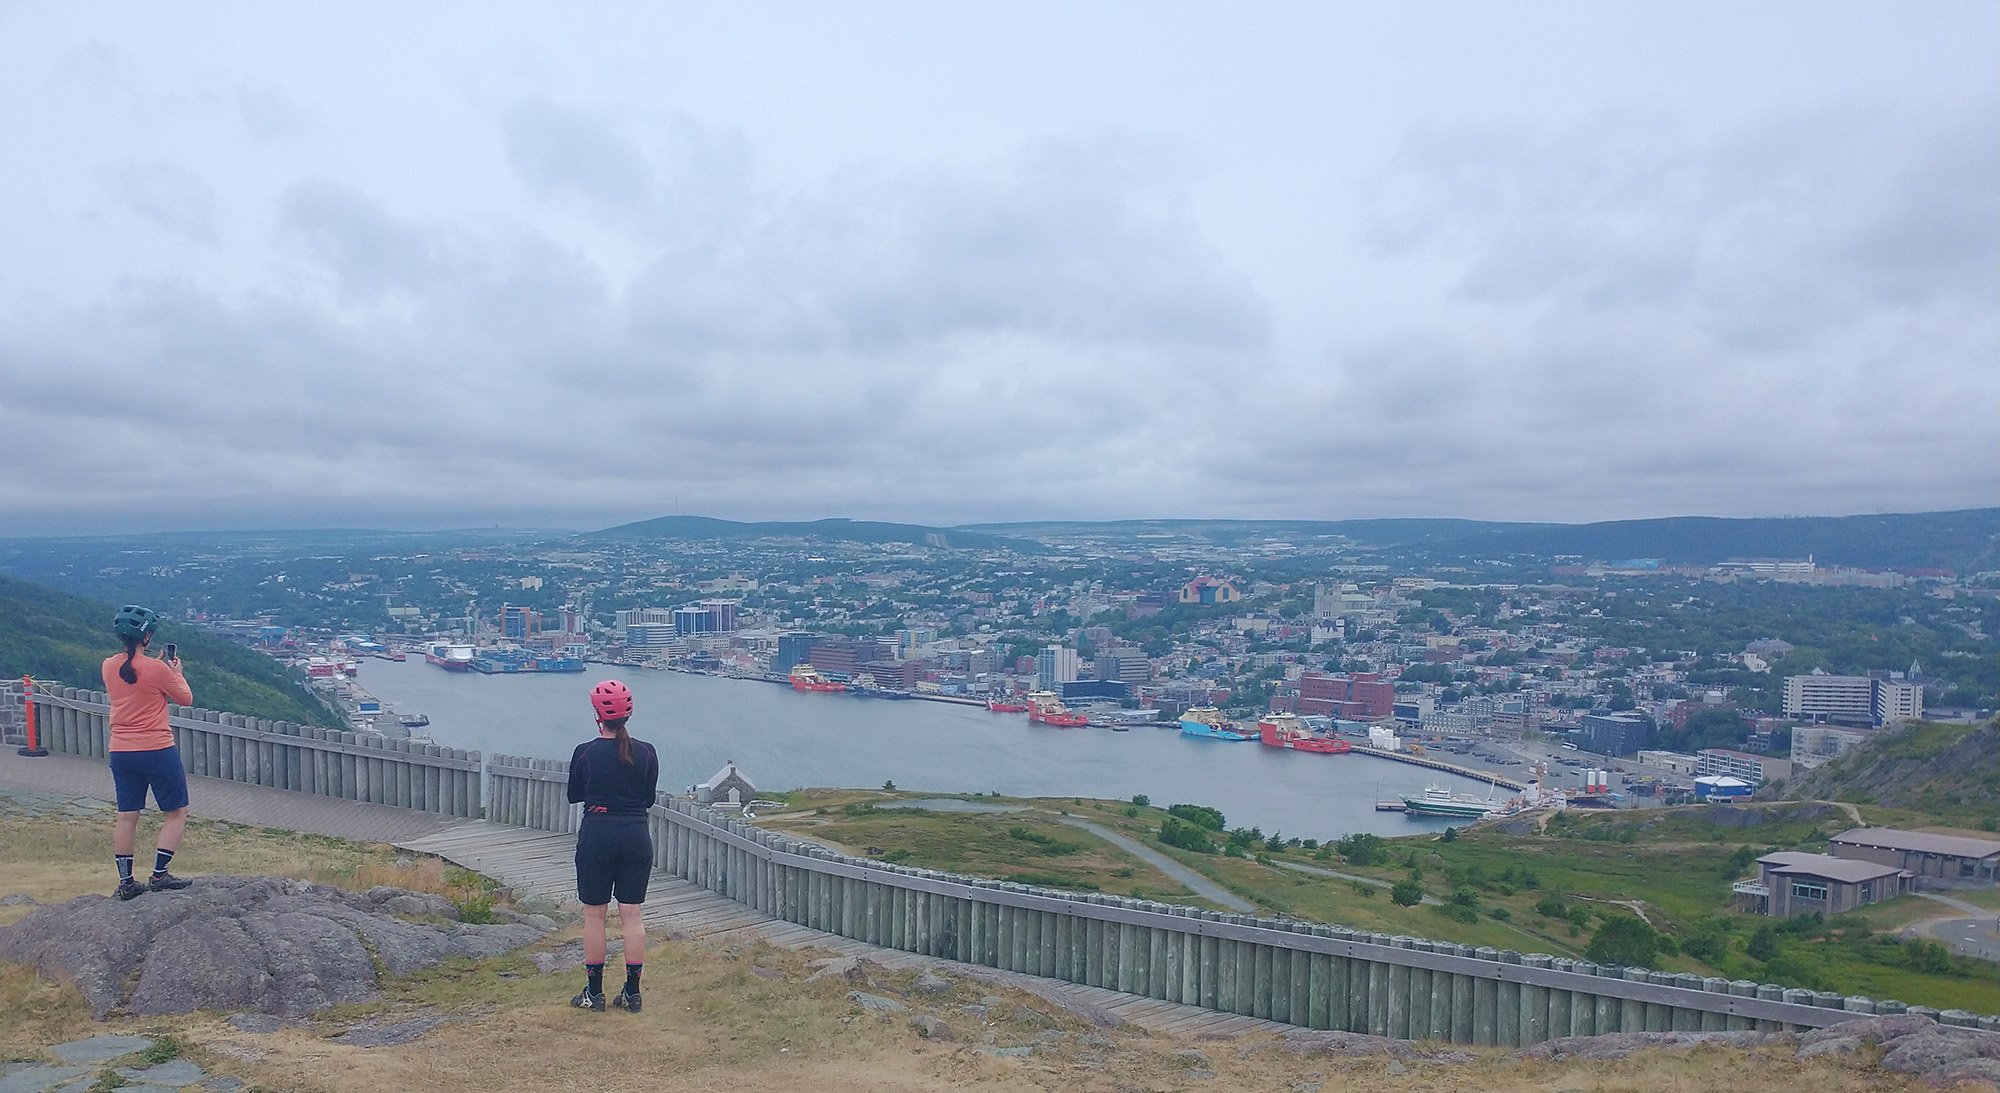 Great view of the city from it. They stationed AA guns there during WW2 as well.